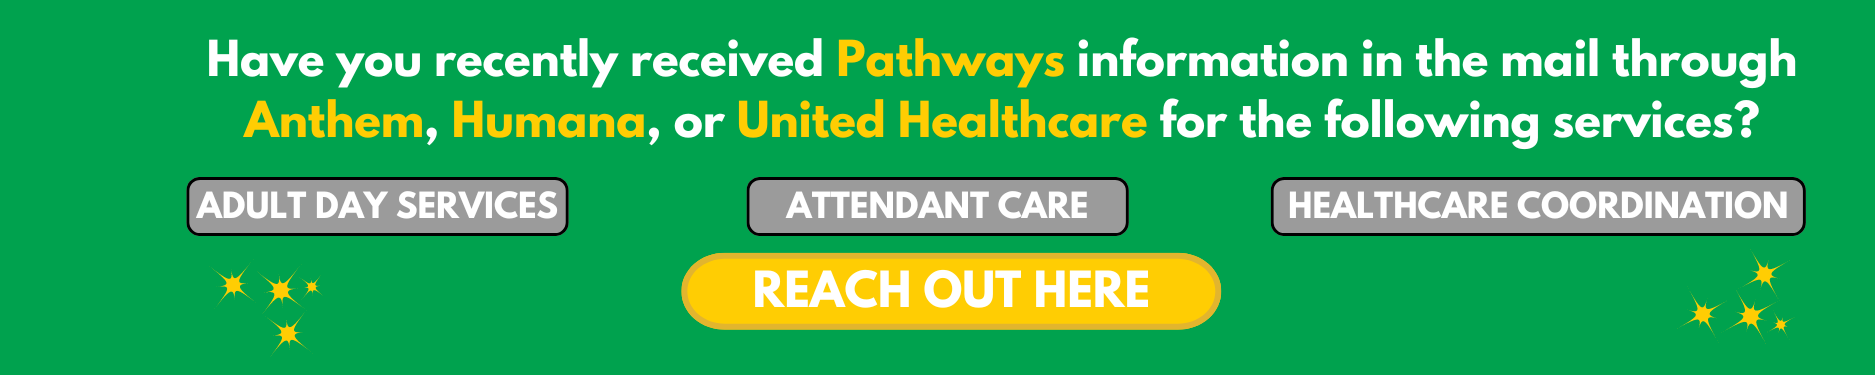 Pathways services from Anthem, Humana, United Healthcare